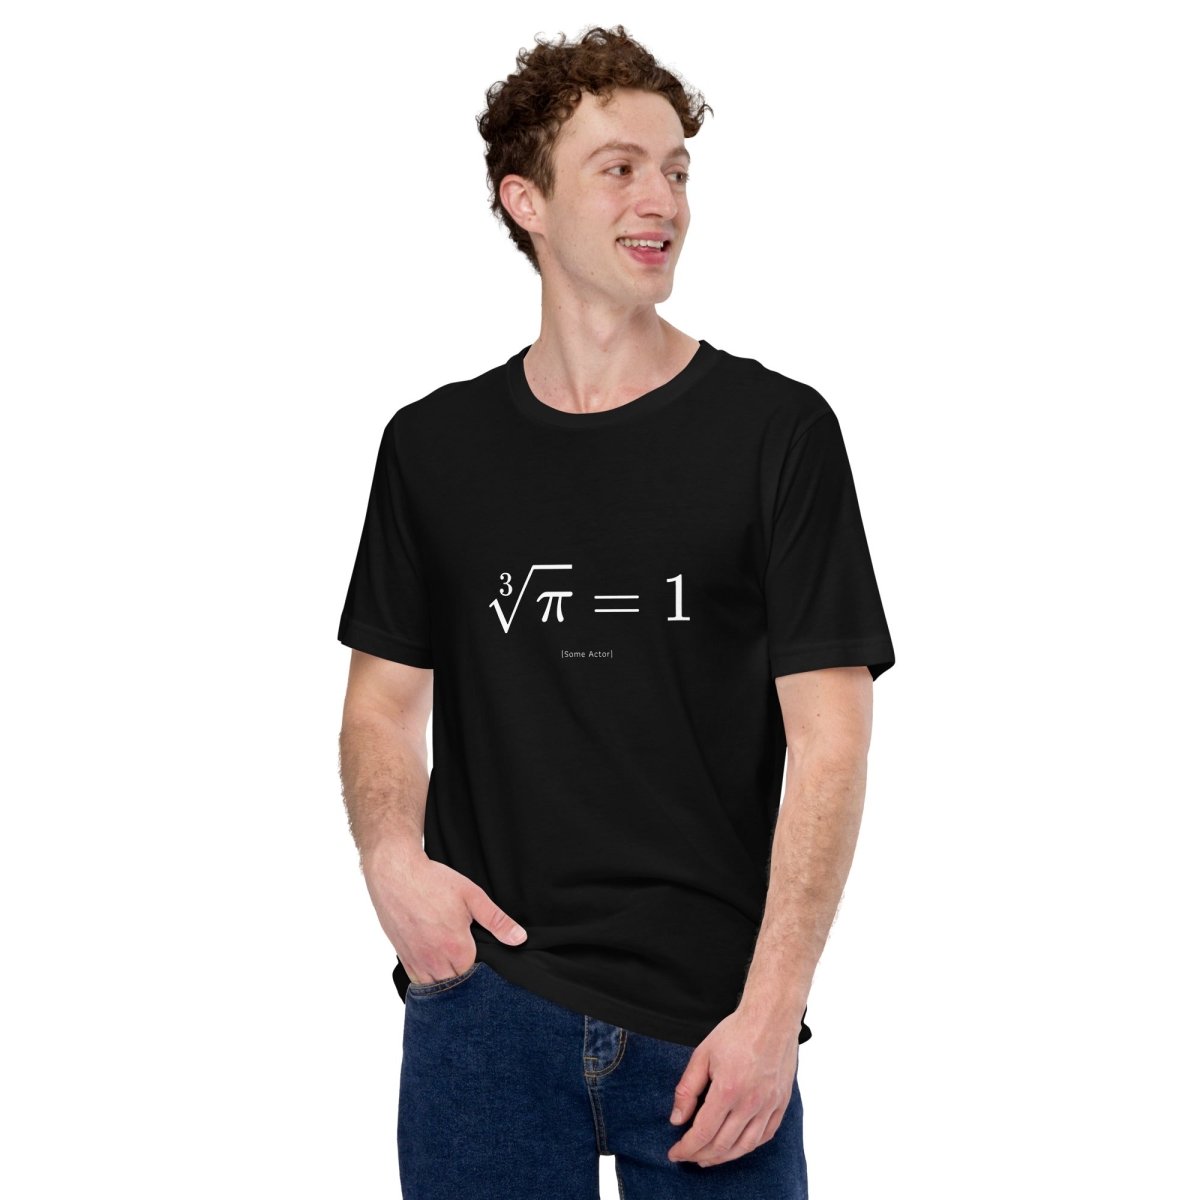 The Cube Root of Pi Equals 1 T - Shirt (unisex) - Black - AI Store